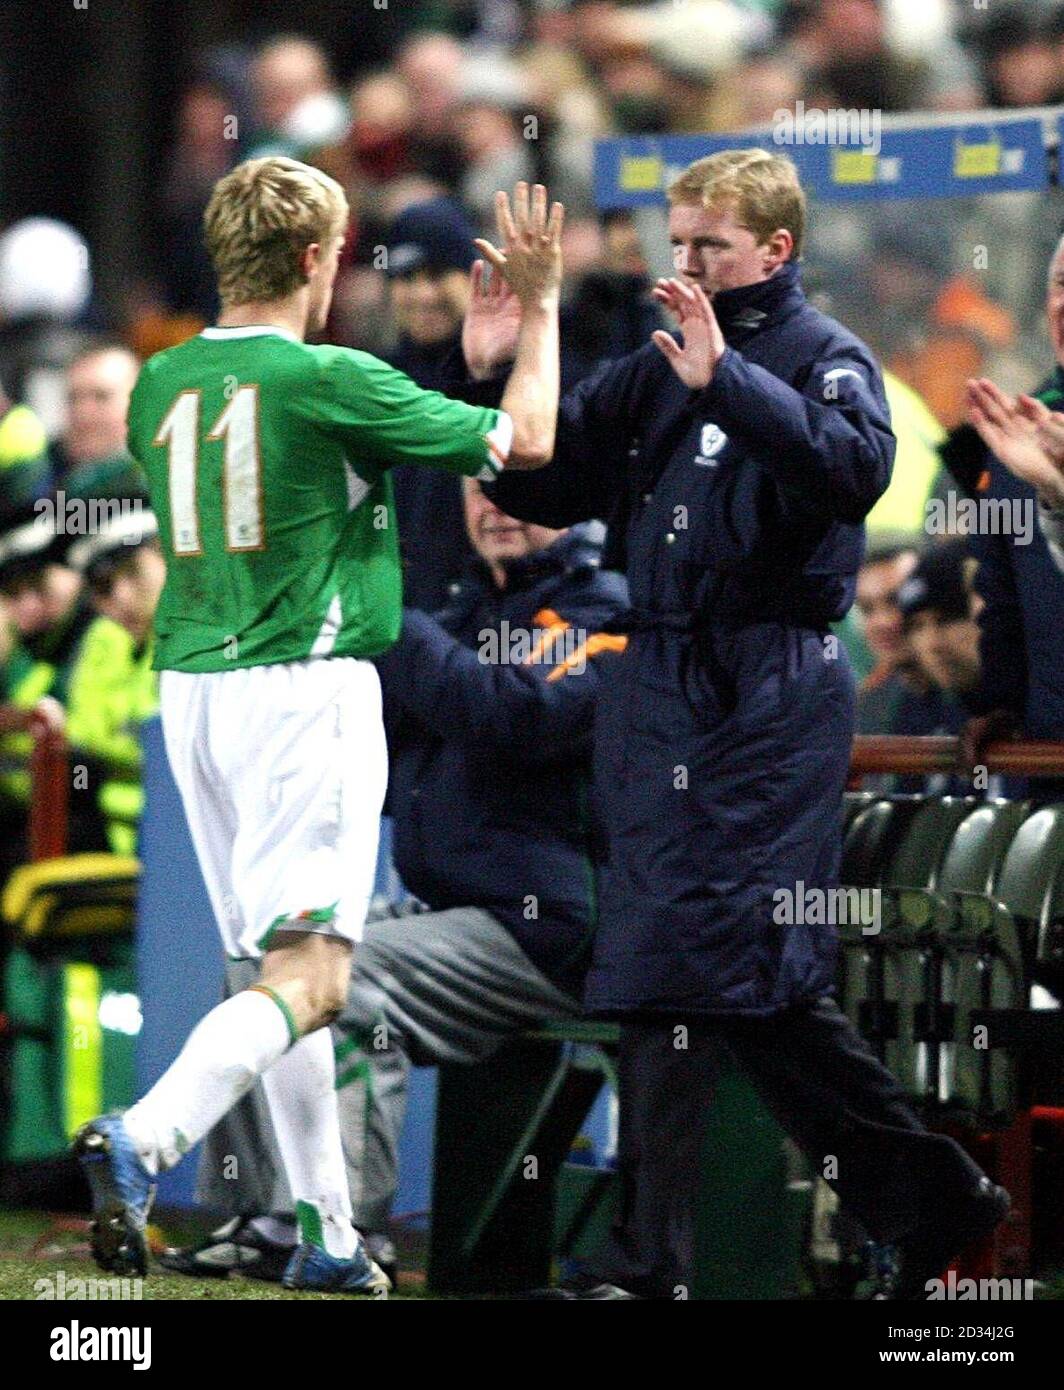 Republic of Ireland's Damien Duff (L) celebrates with manager Steve Staunton after scoring during the friendly International match against Sweden at Lansdowne Road, Dublin, Ireland, Wednesday March 1, 2006. PRESS ASSOCIATION Photo. Photo credit should read: Julien Behal/PA. THIS PICTURE CAN ONLY BE USED WITHIN THE CONTEXT OF AN EDITORIAL FEATURE. NO WEBSITE/INTERNET USE UNLESS SITE IS REGISTERED WITH FOOTBALL ASSOCIATION PREMIER LEAGUE. Stock Photo